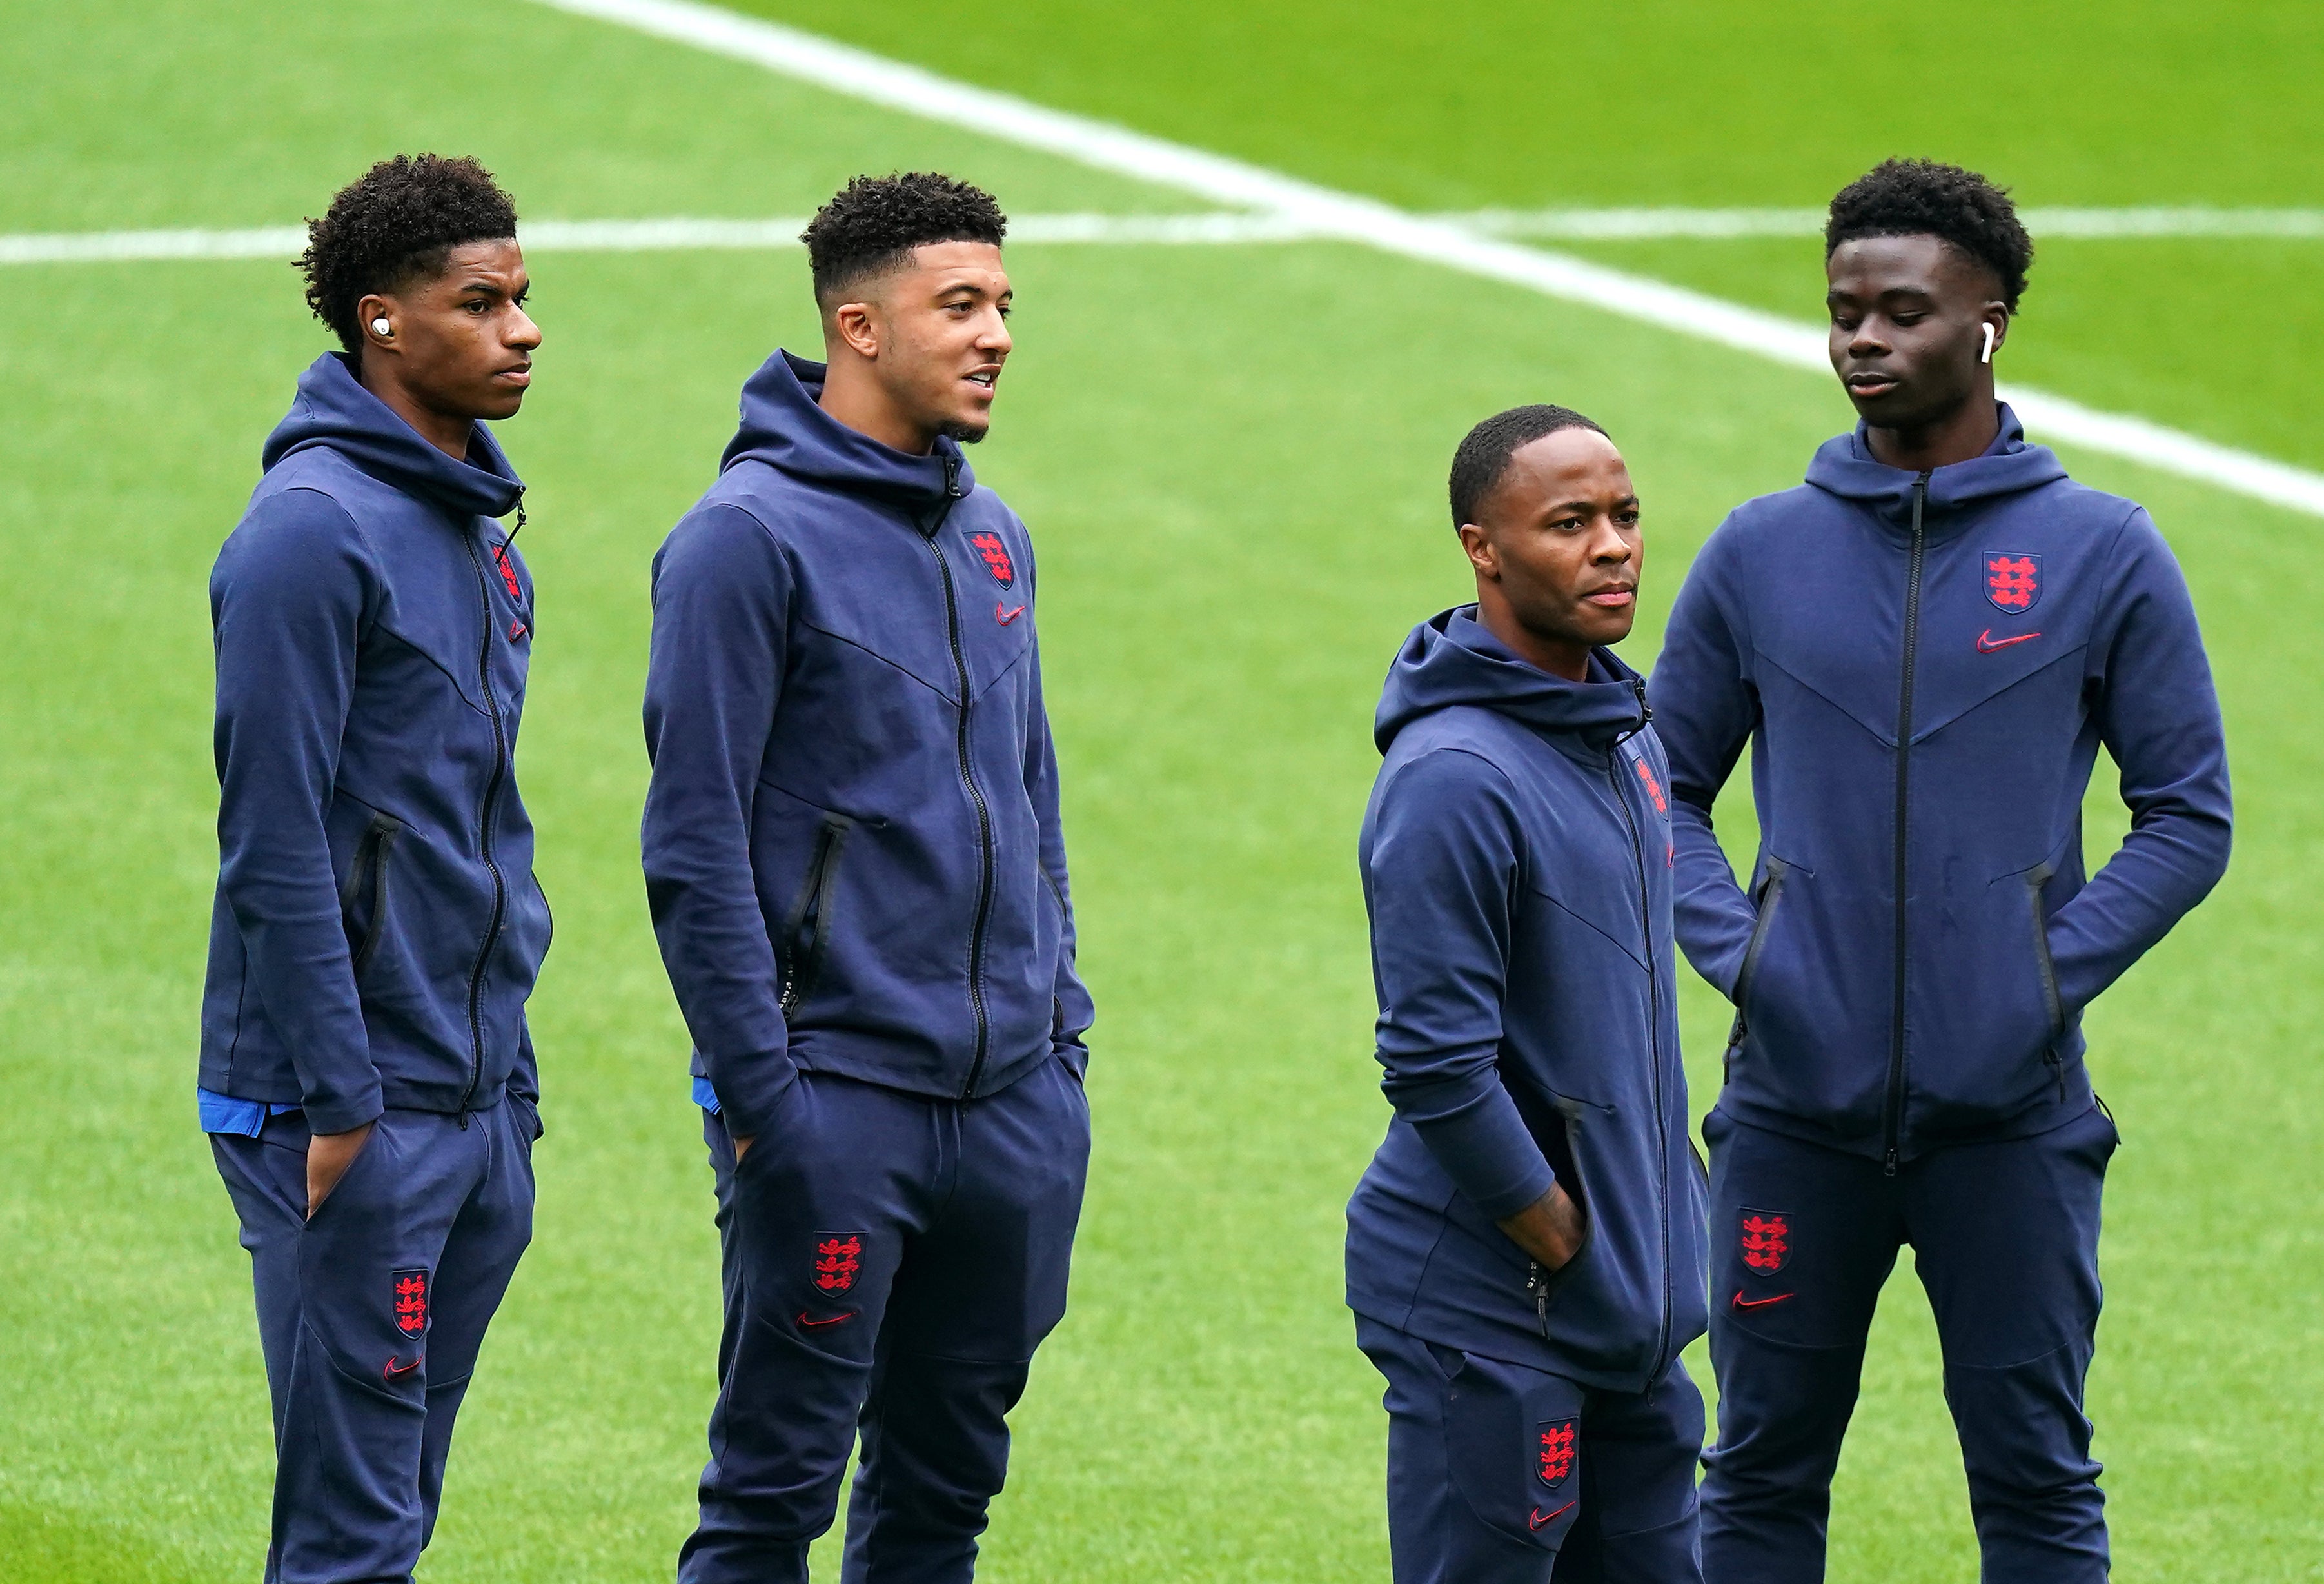 File photo dated 29-06-2021 of England players. Marcus Rashford, Jadon Sancho and Bukayo Saka were bombarded with racist abuse on social media after their misses in the penalty in the Euro 2020 Final. Issue date: Wednesday July 14th, 2021. Issue date: Thursday December 16, 2021.